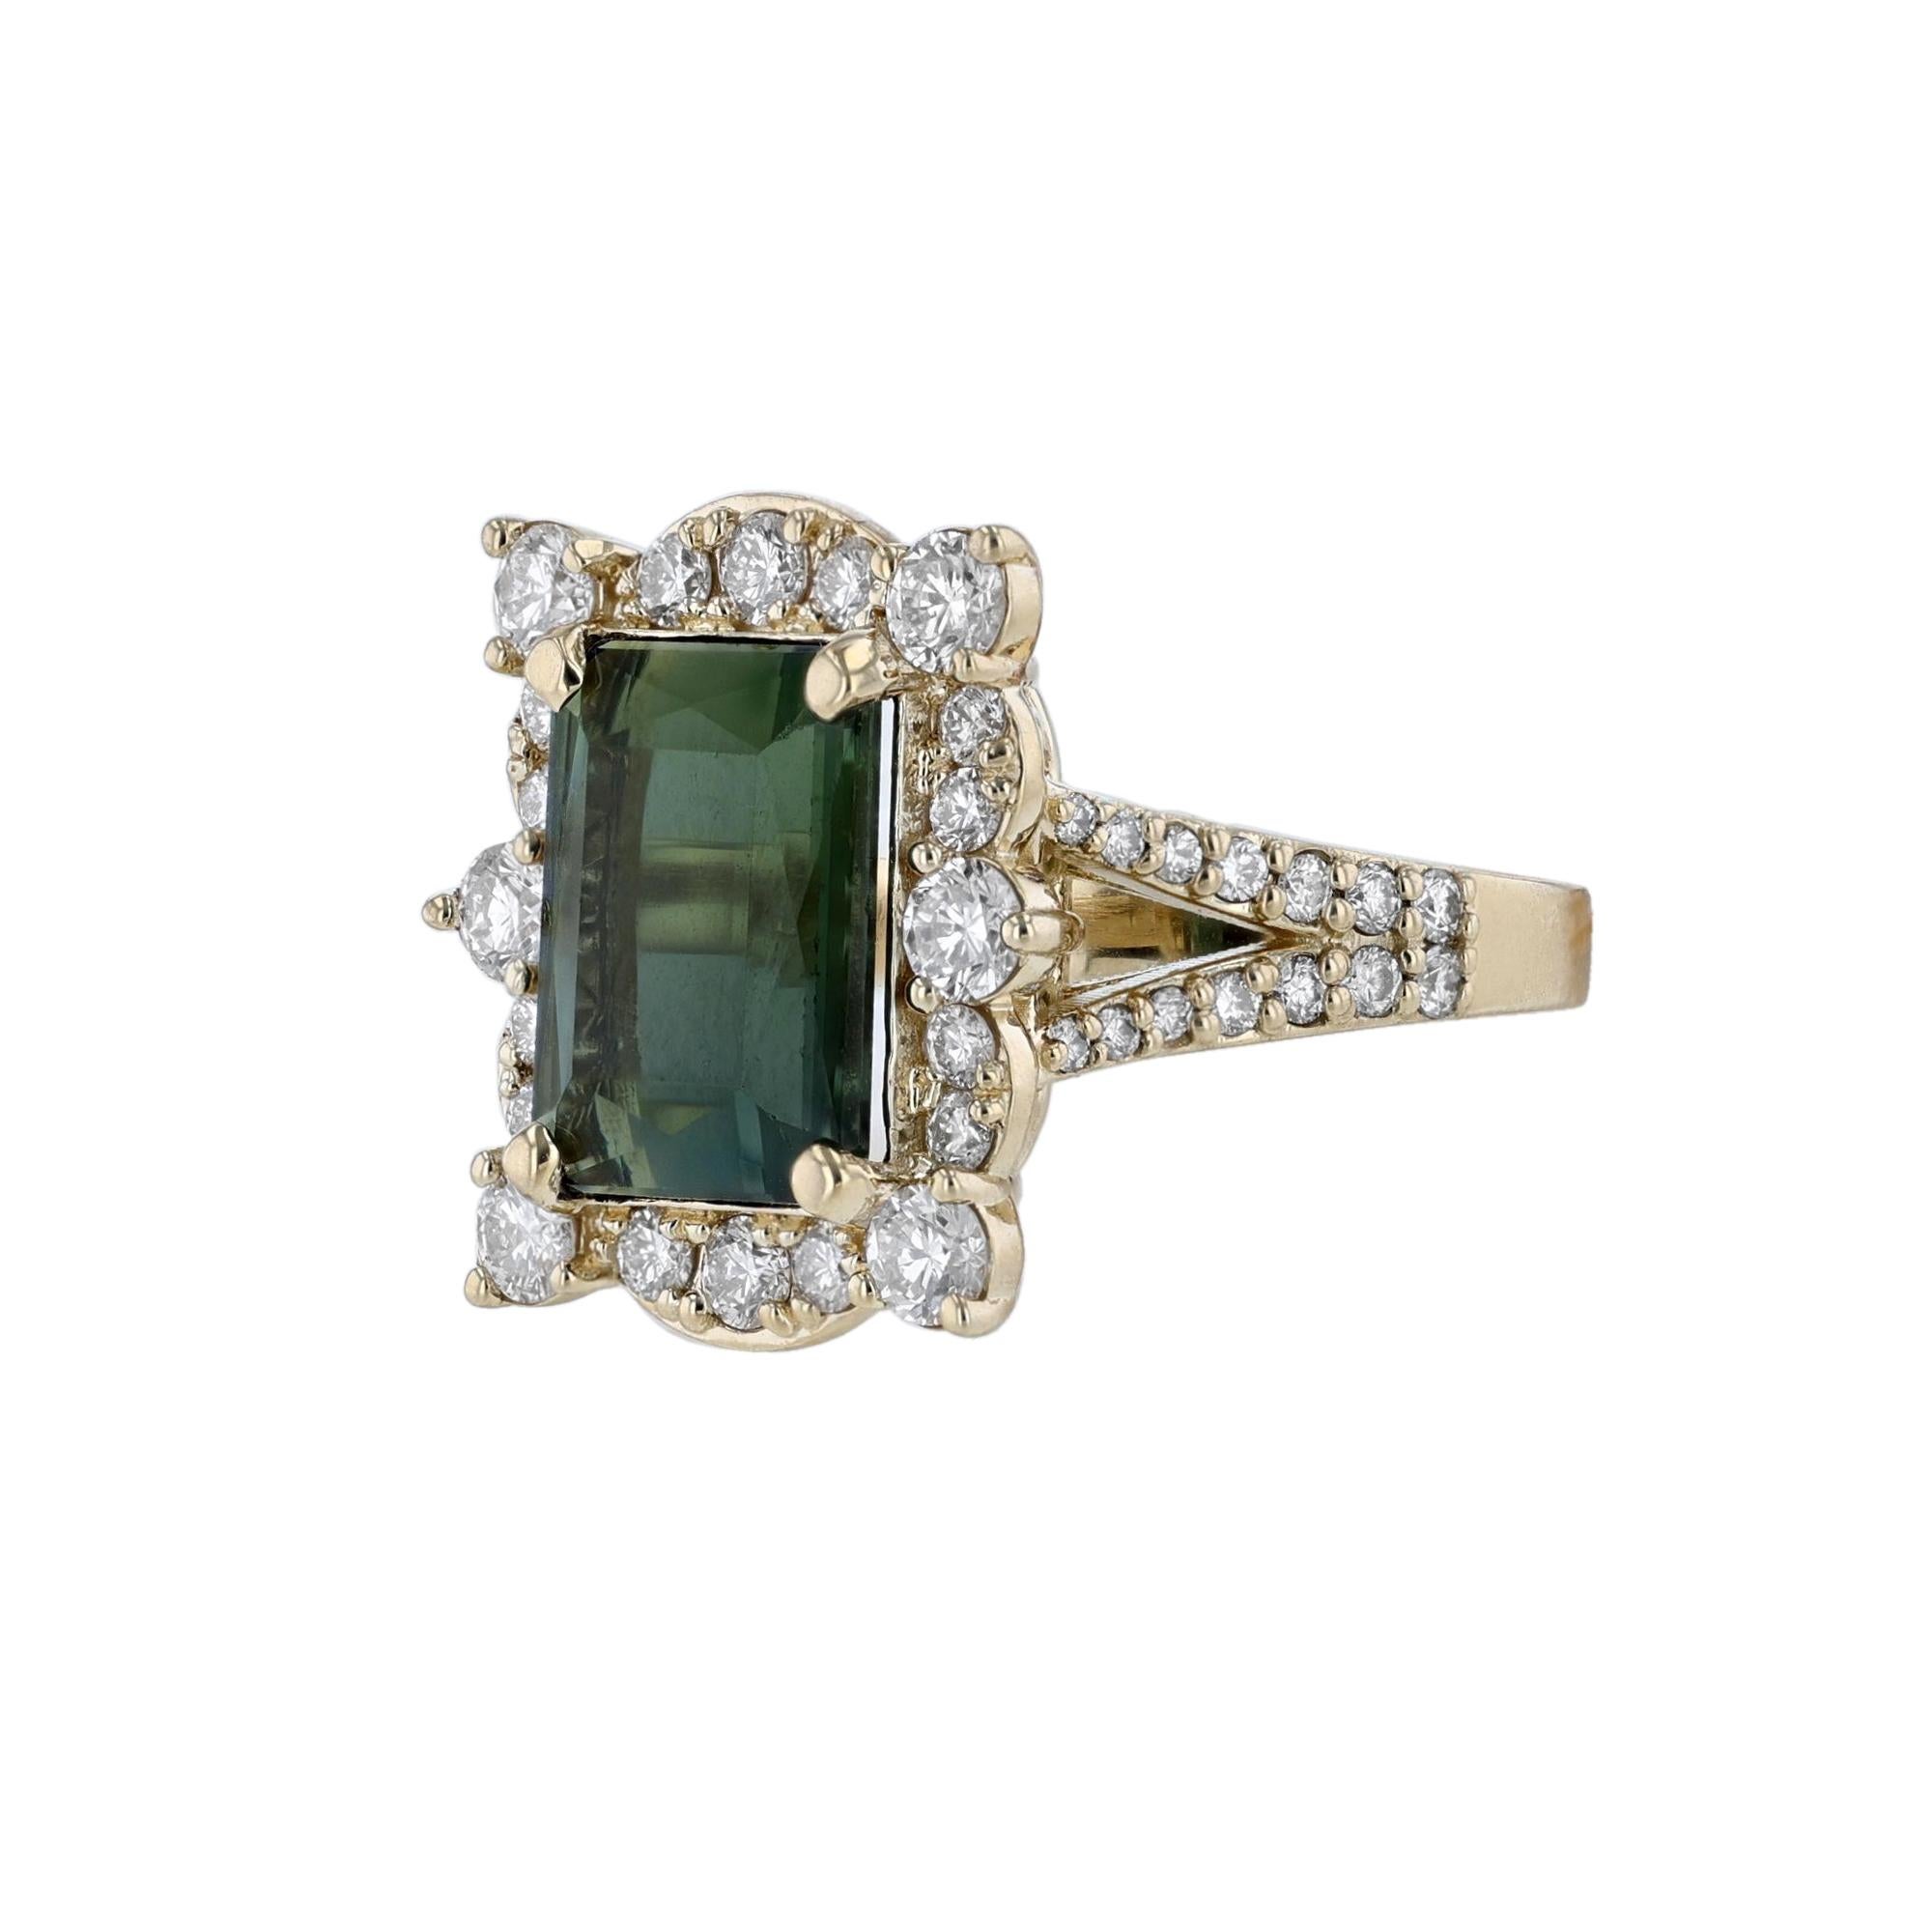 This ring is in 14K yellow gold. It features 1 emerald cut Green Tourmaline weighing 5.95 carats. Along with 48 round cut diamonds weighing 1.50 carats. All stones are prong set. With a color grade (H) and clarity grade (SI2). 
